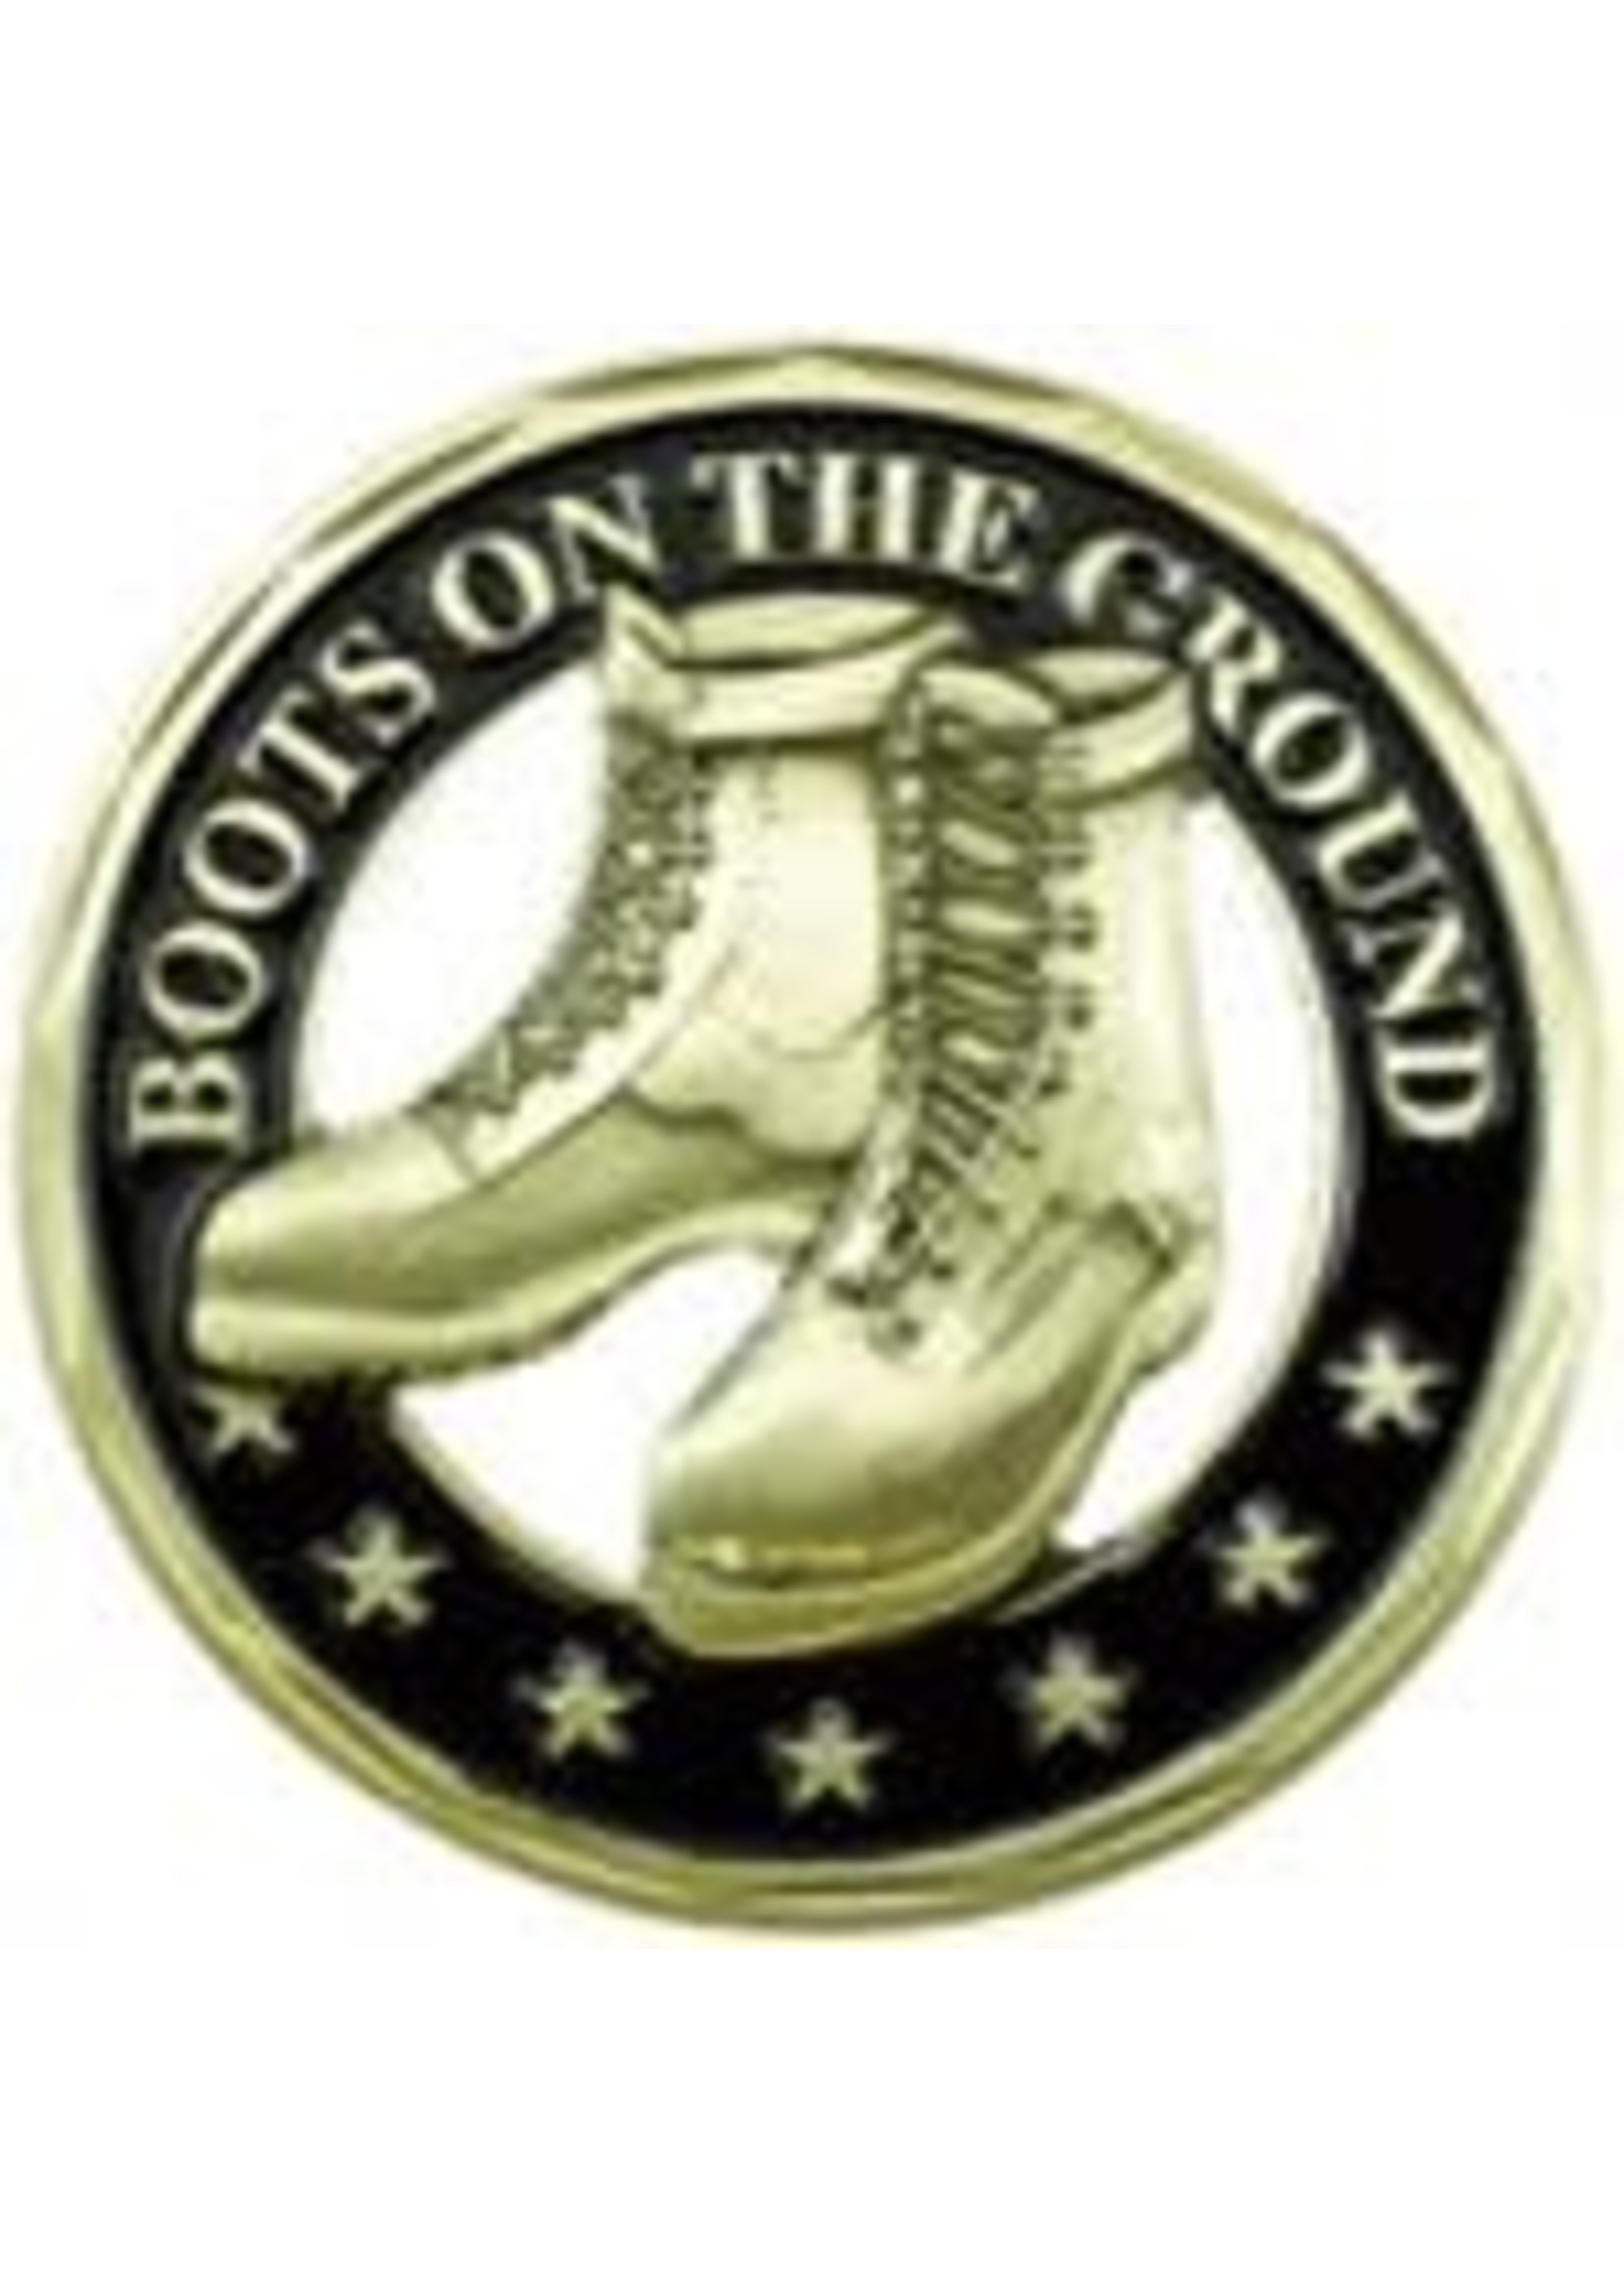 Eagle Crest Challenge Coin - Army Boots on the Ground